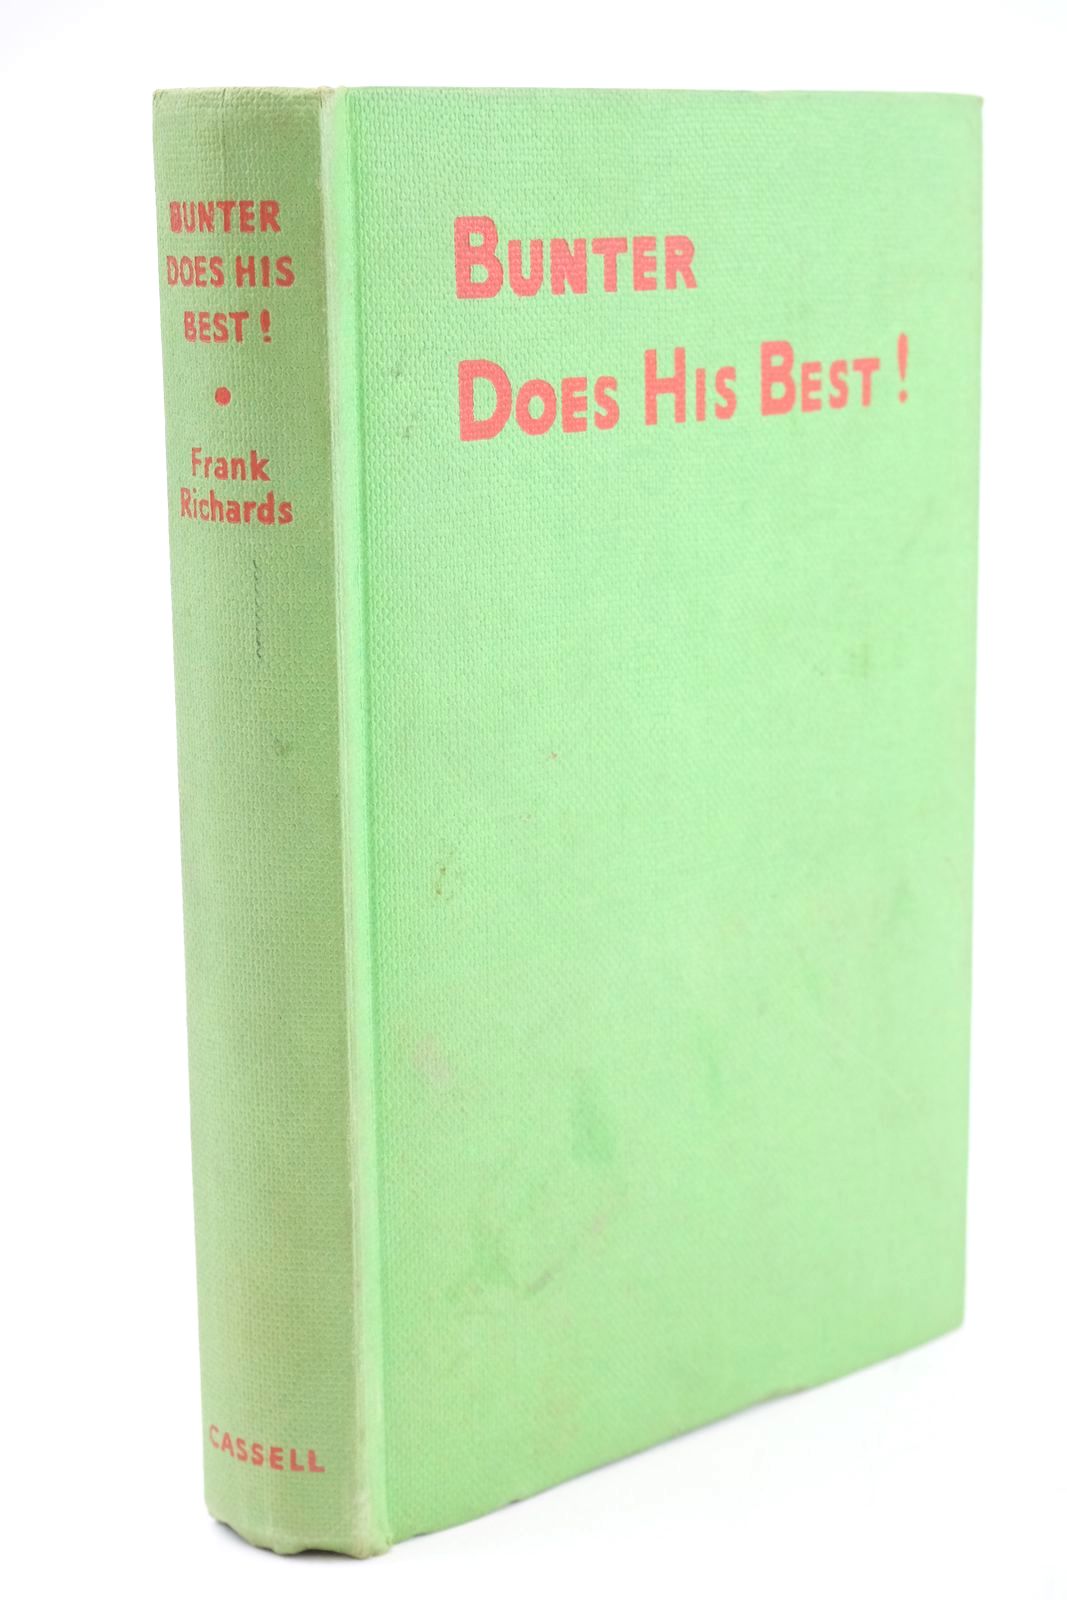 Photo of BUNTER DOES HIS BEST written by Richards, Frank illustrated by Macdonald, R.J. published by Cassell &amp; Co. Ltd. (STOCK CODE: 1323902)  for sale by Stella & Rose's Books